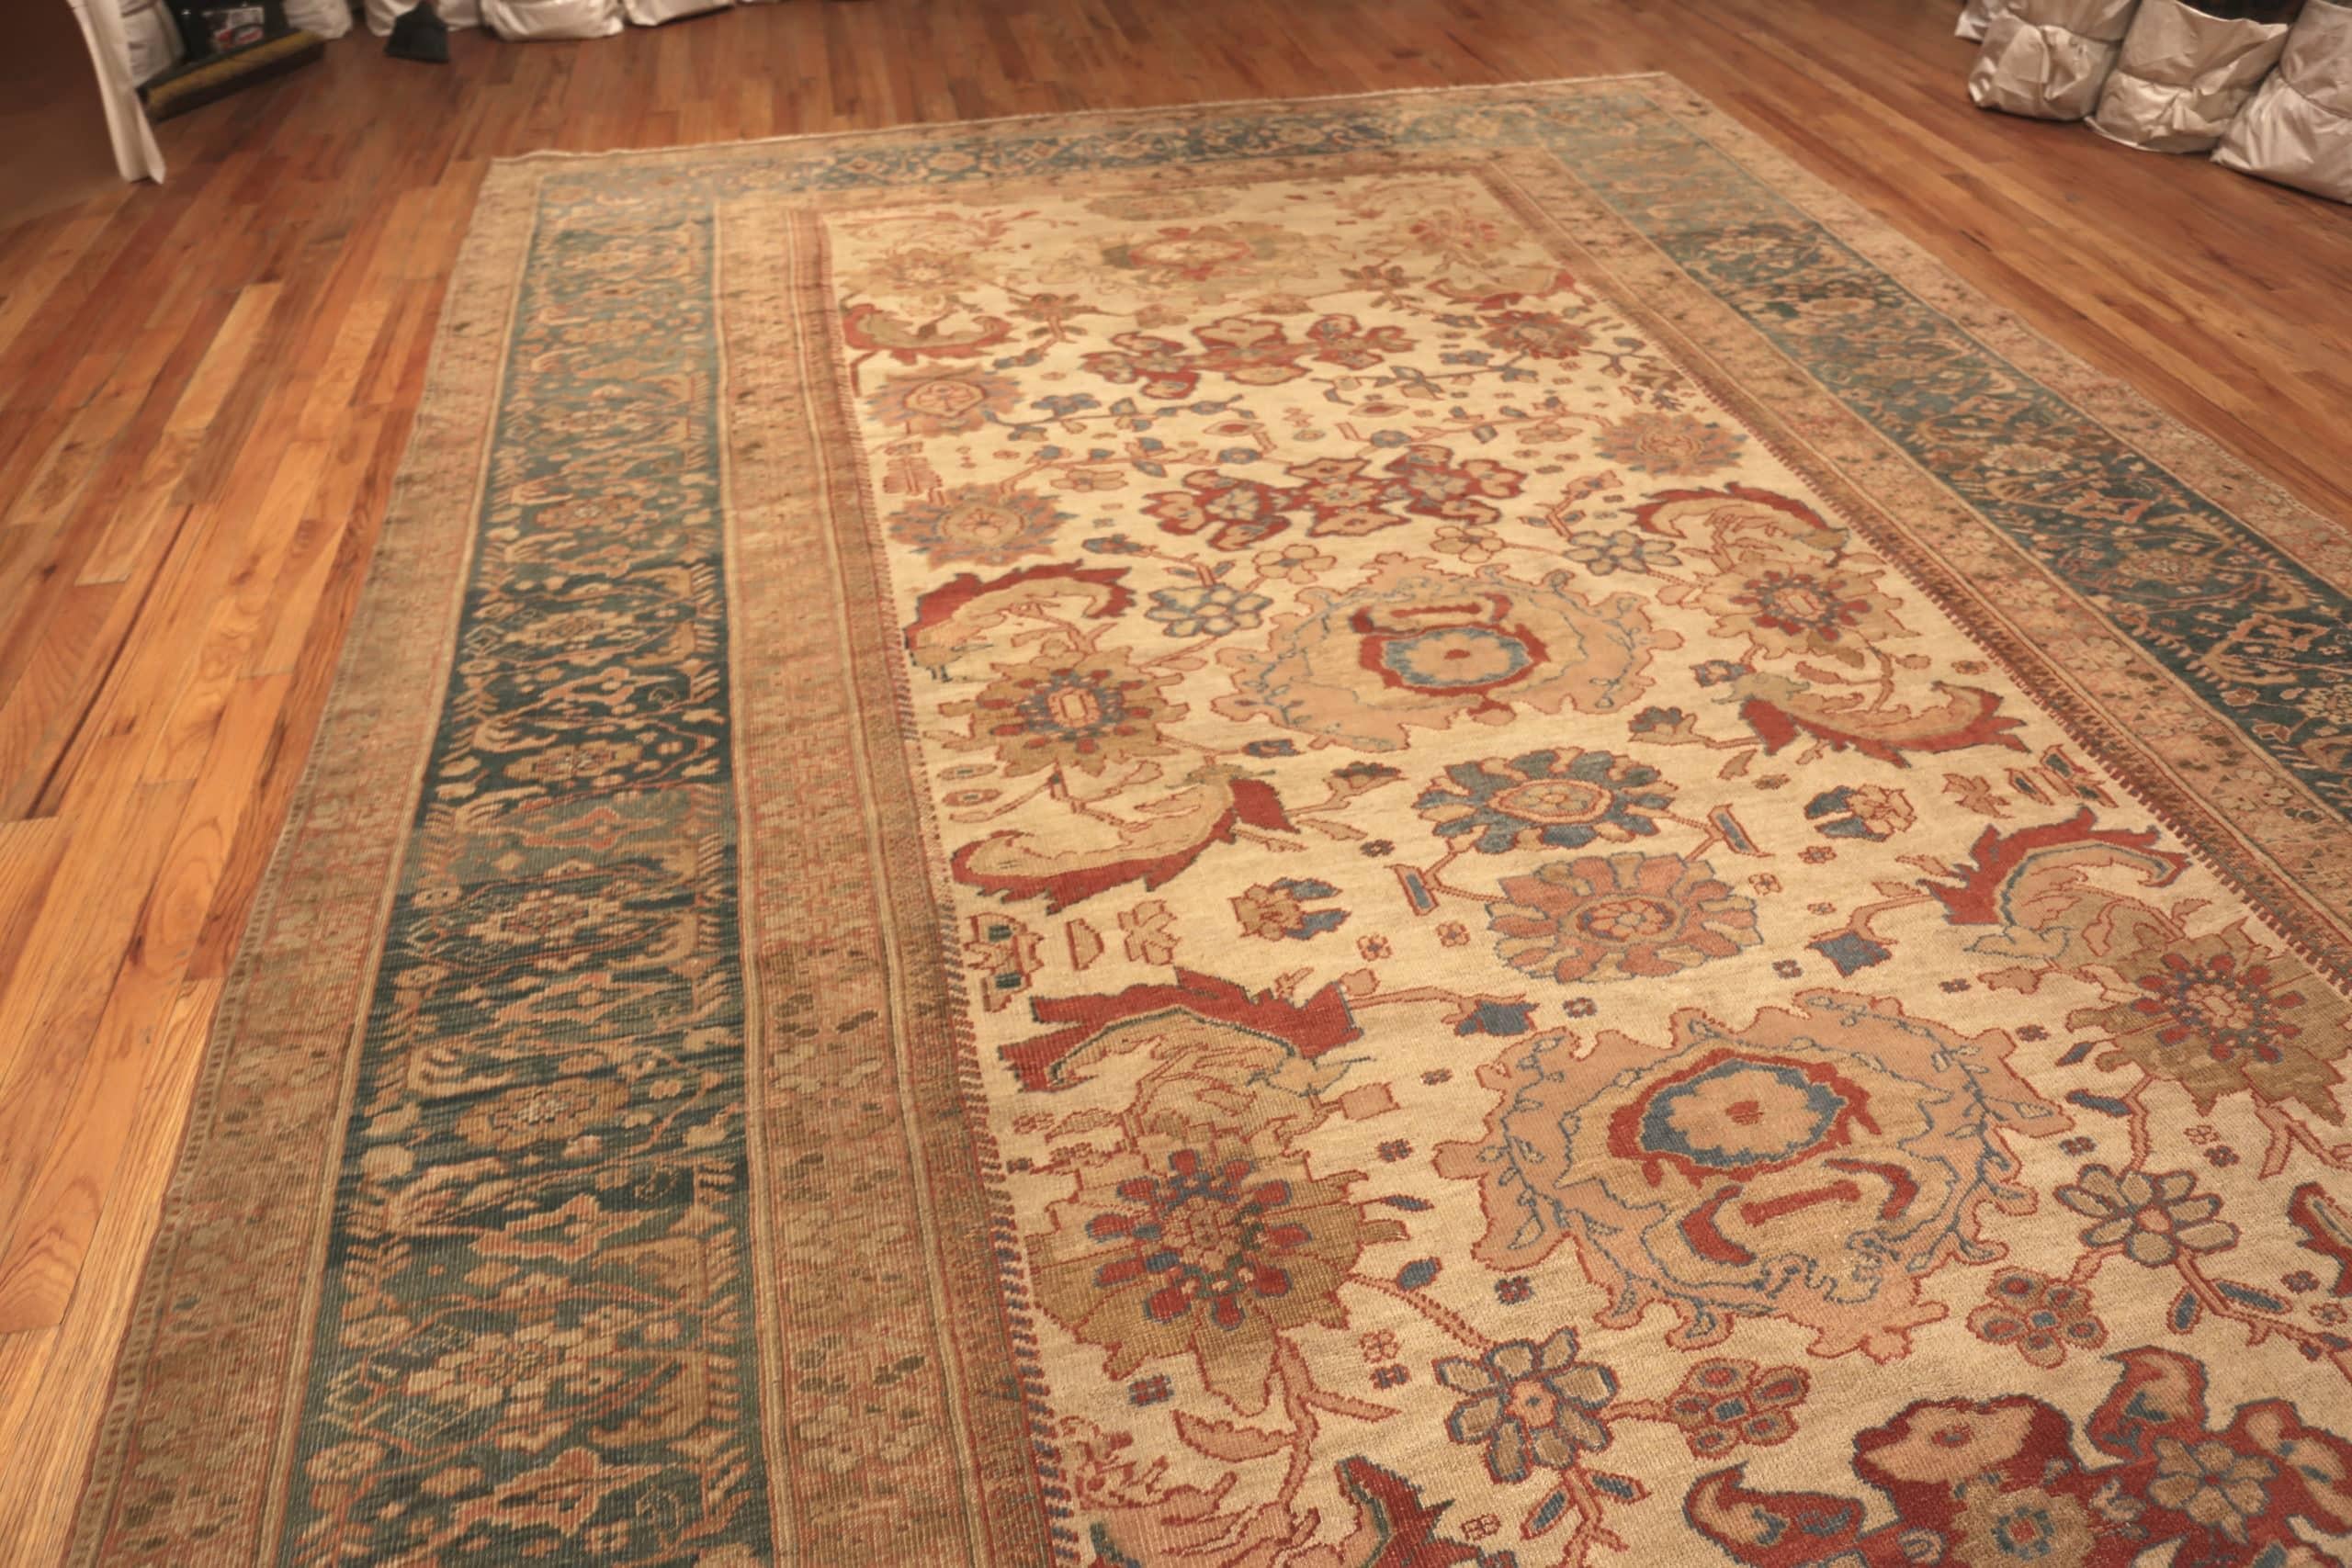 Wool Nazmiyal Antique Ziegler Sultanabad Persian Rug. 10 ft 10 in x 17 ft 6 in